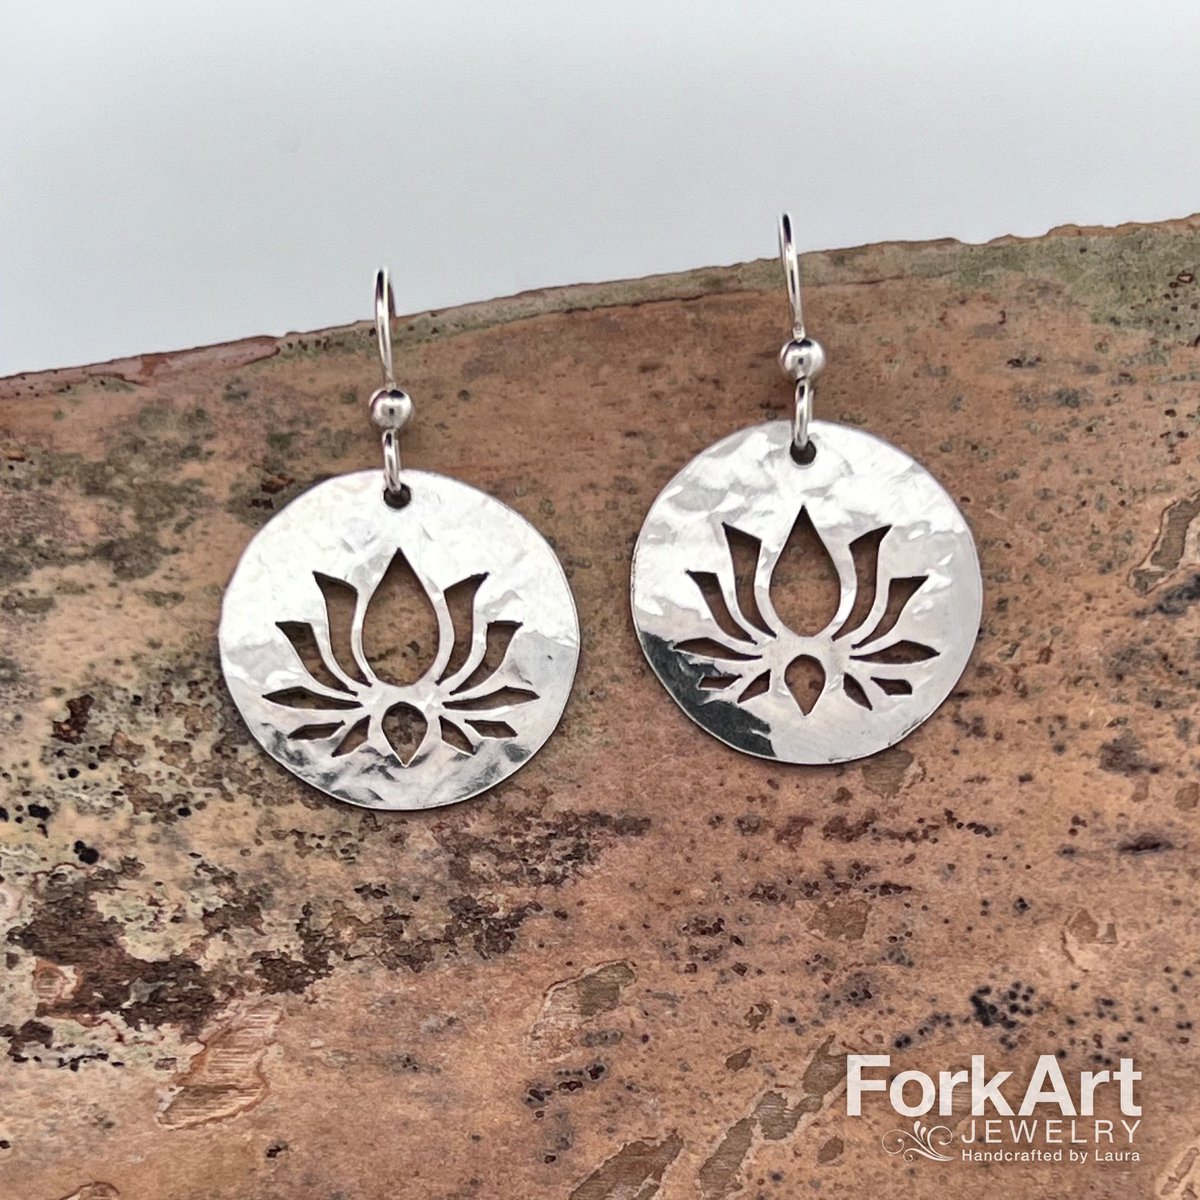 I received an order for one of my new lotus flower pendants. She asked if I could make matching earrings. I did the same design but made them round. What do you think?
.
.
.
#lotus, #lotusflower, #lotuspendant, #lotusearrings, #spoonjewelry, #spoonpendant, #upcycle,